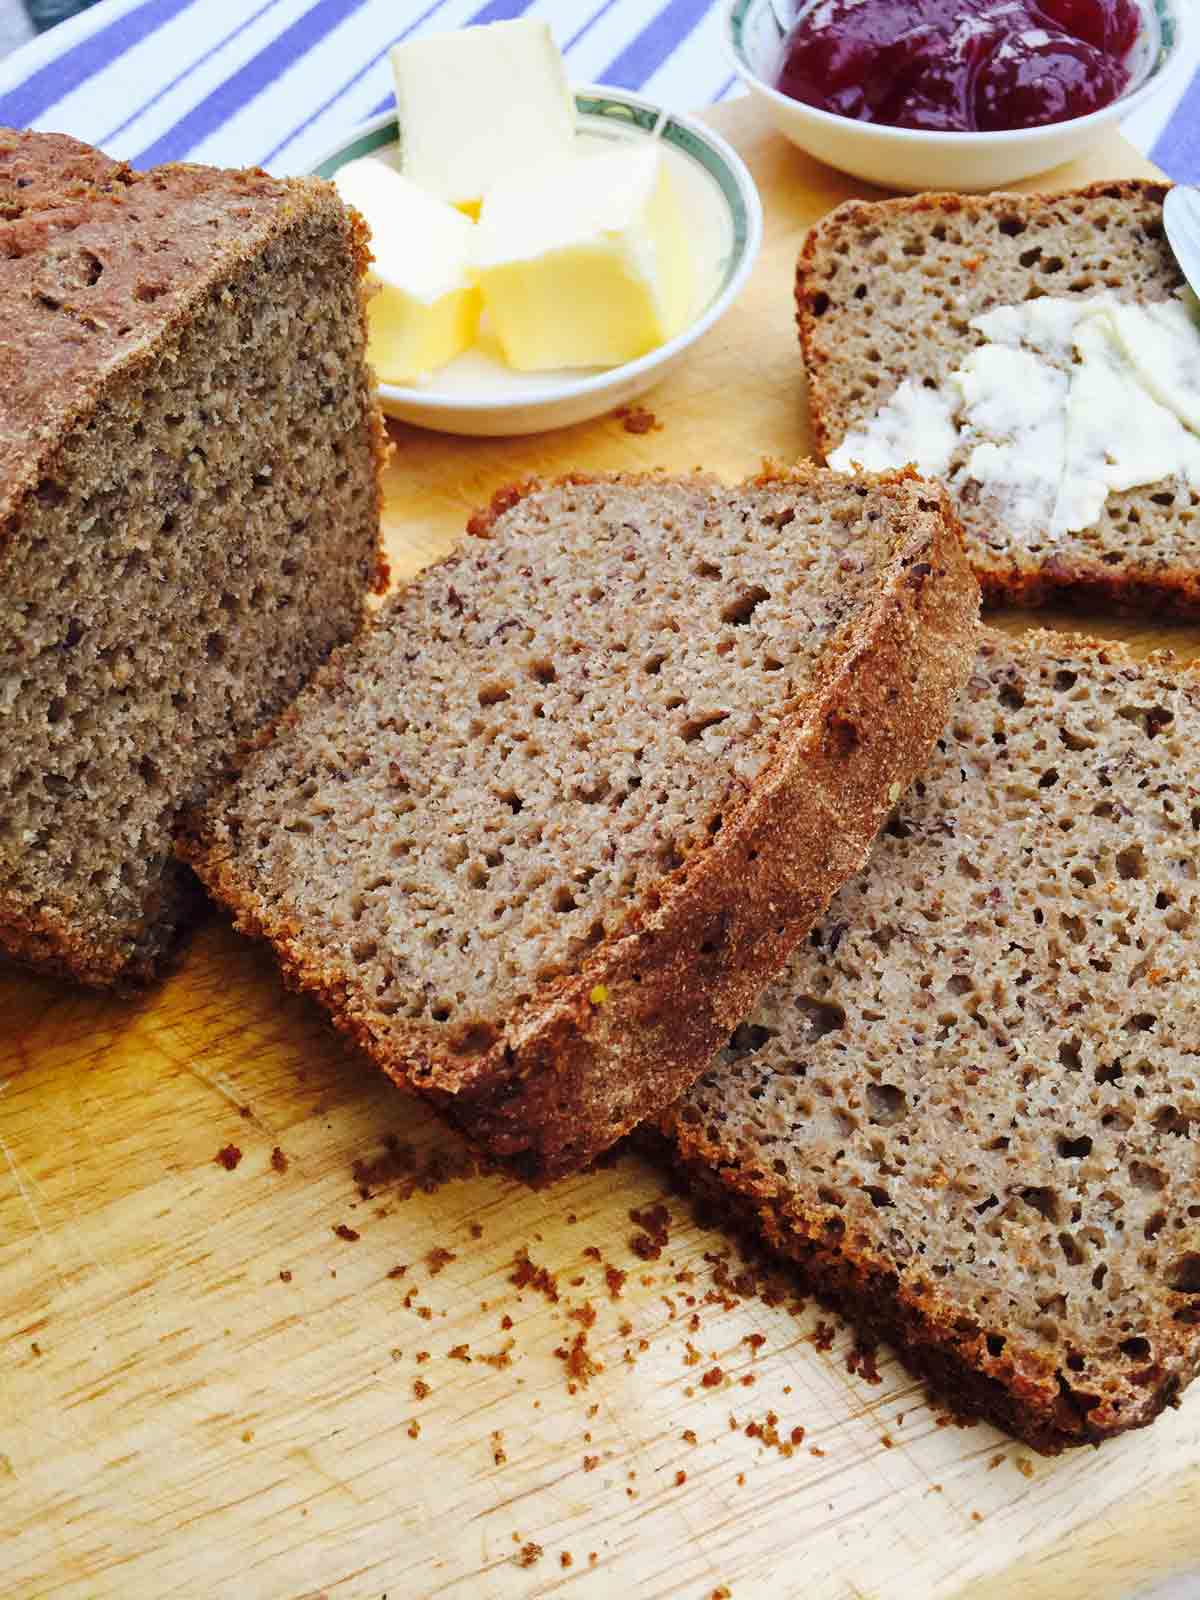 A slice of sourdough rye and ground linseed bread